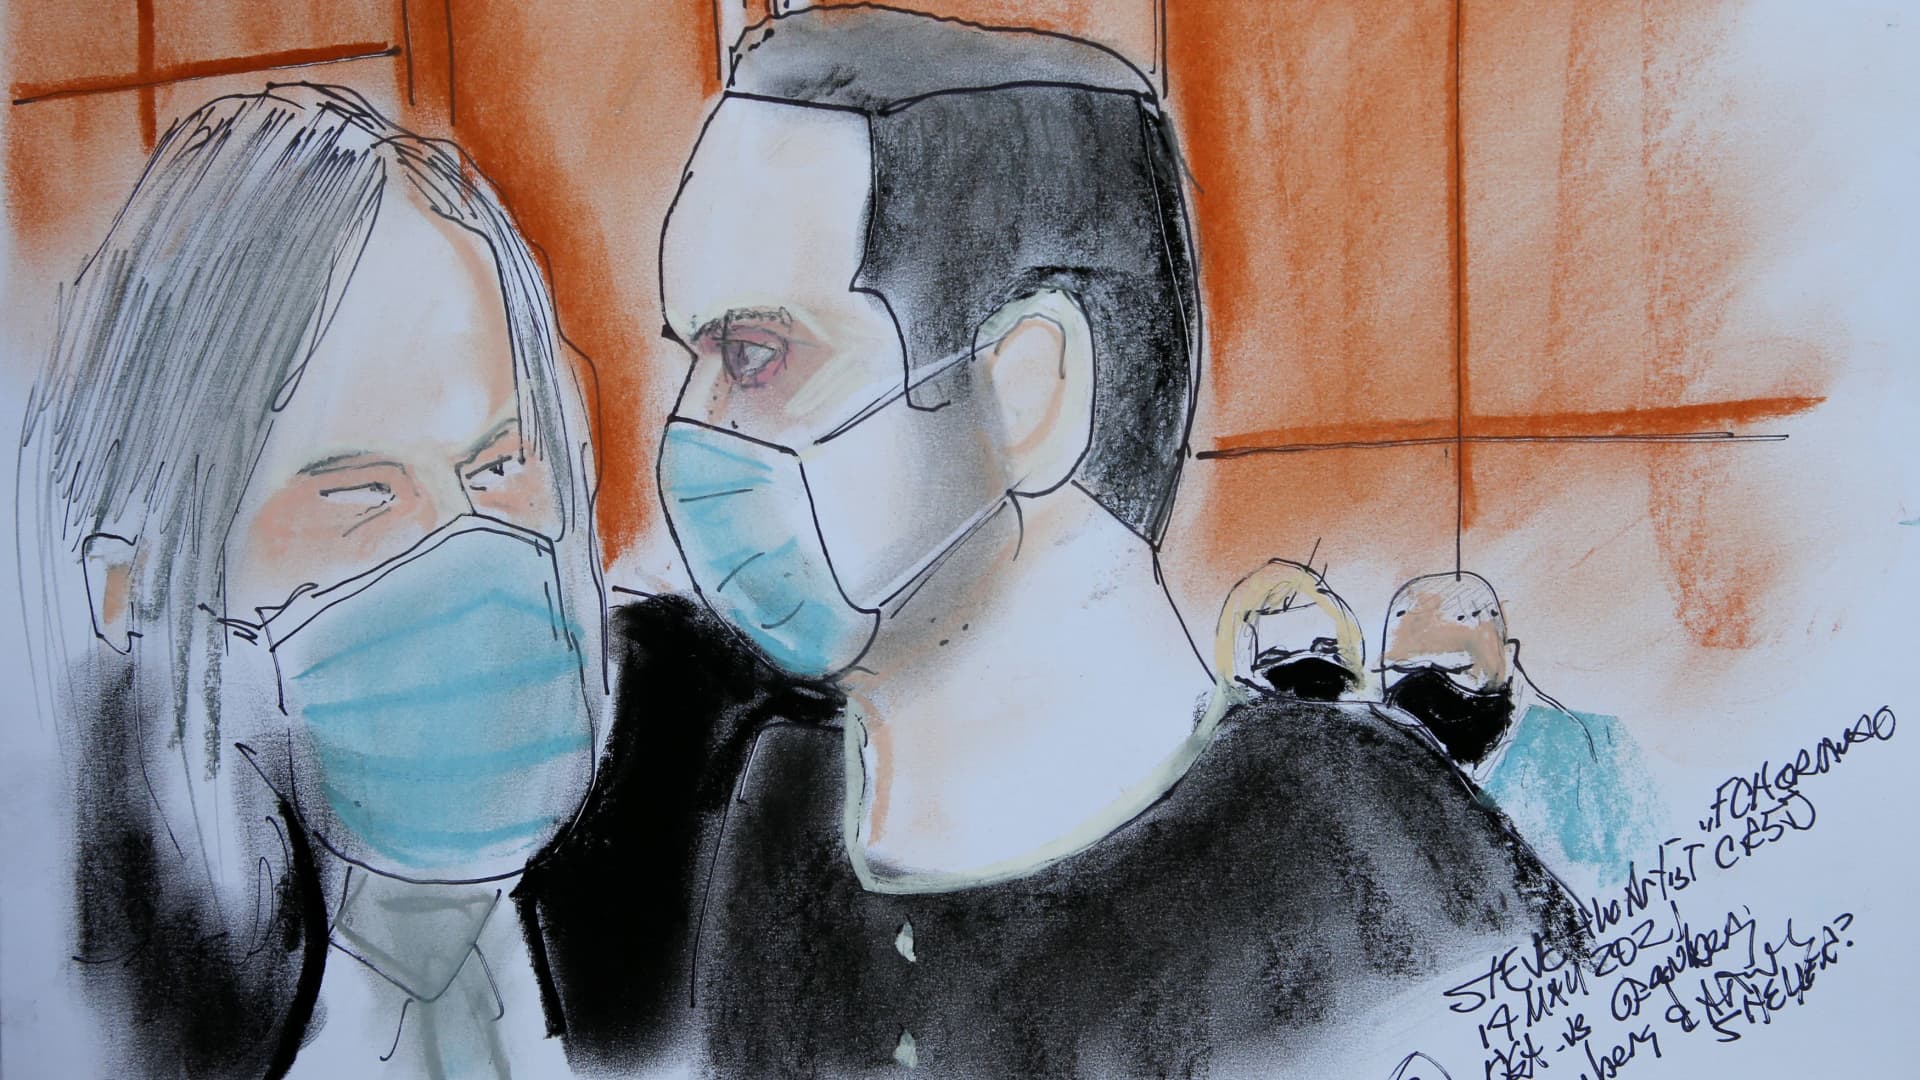 Attorney Fritz Scheller and Joel Greenberg appears during a hearing of Greenberg, a former tax collector in Florida's Seminole County who is central to the federal investigation of Republican U.S. Representative Matt Gaetz, at the federal court in Orlando, Florida, U.S. May 17, 2021, in this courtroom sketch.